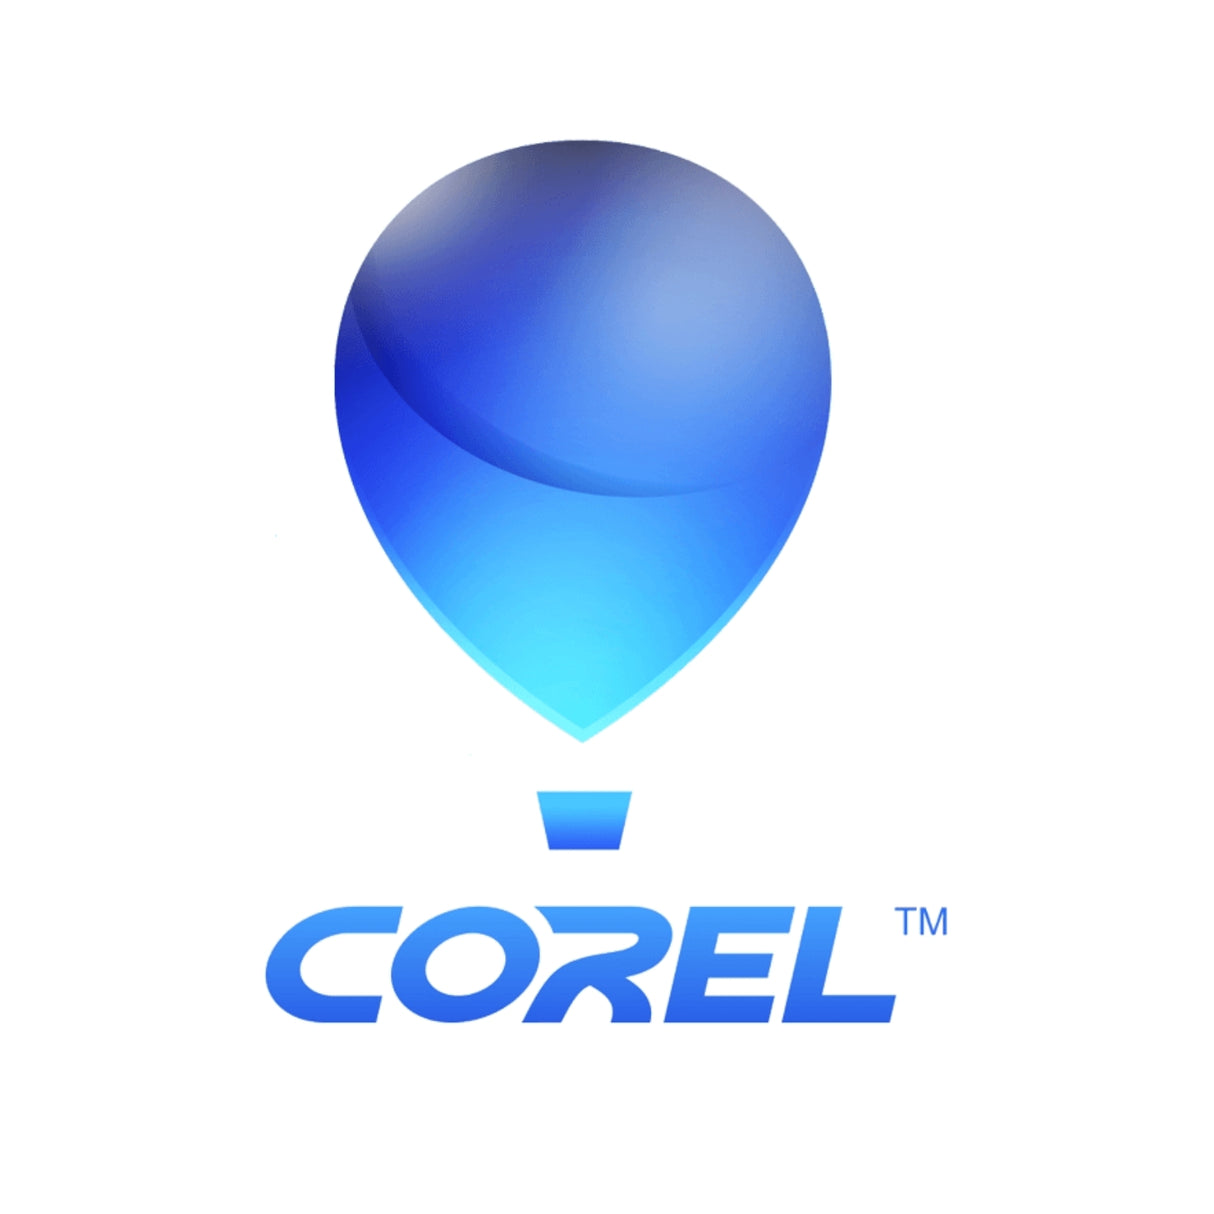 Corel - Graphic design, vector, and CAD software